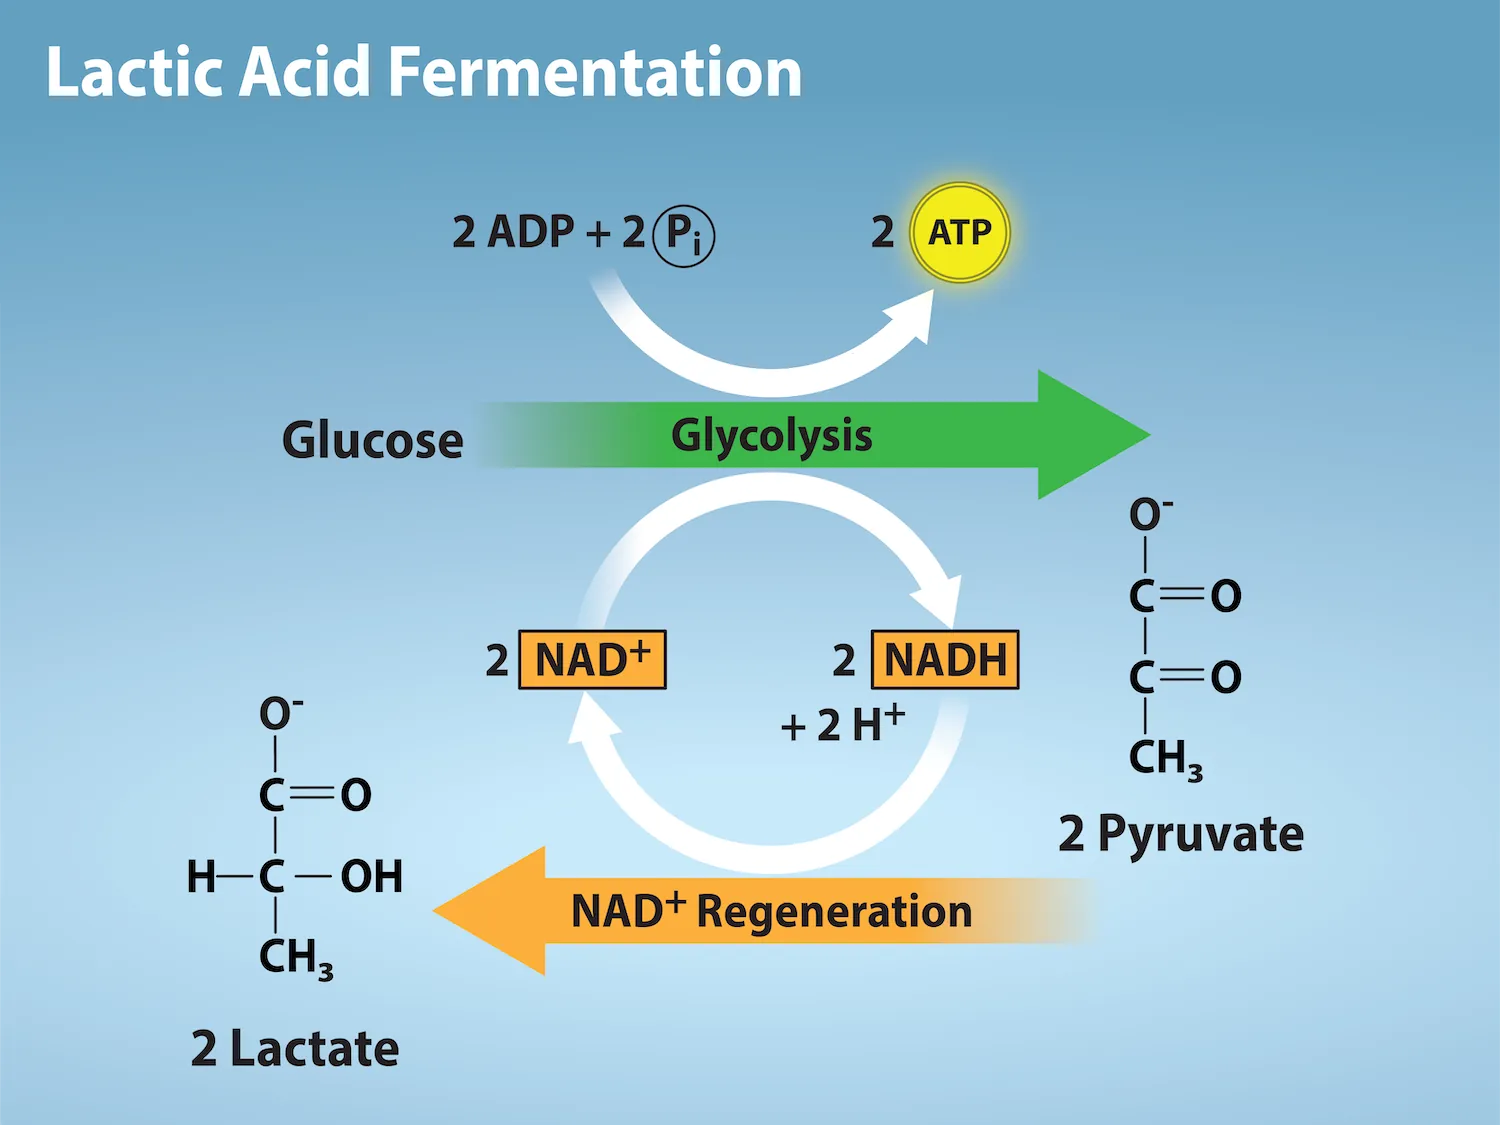 This illustration shows that during glycolysis, glucose is broken down into two pyruvate molecules and, in the process, two N A D H are formed from N A D superscript plus sign baseline. During lactic acid fermentation, the two pyruvate molecules are converted into lactate, and N A D H is recycled back into N A D superscript plus sign baseline.